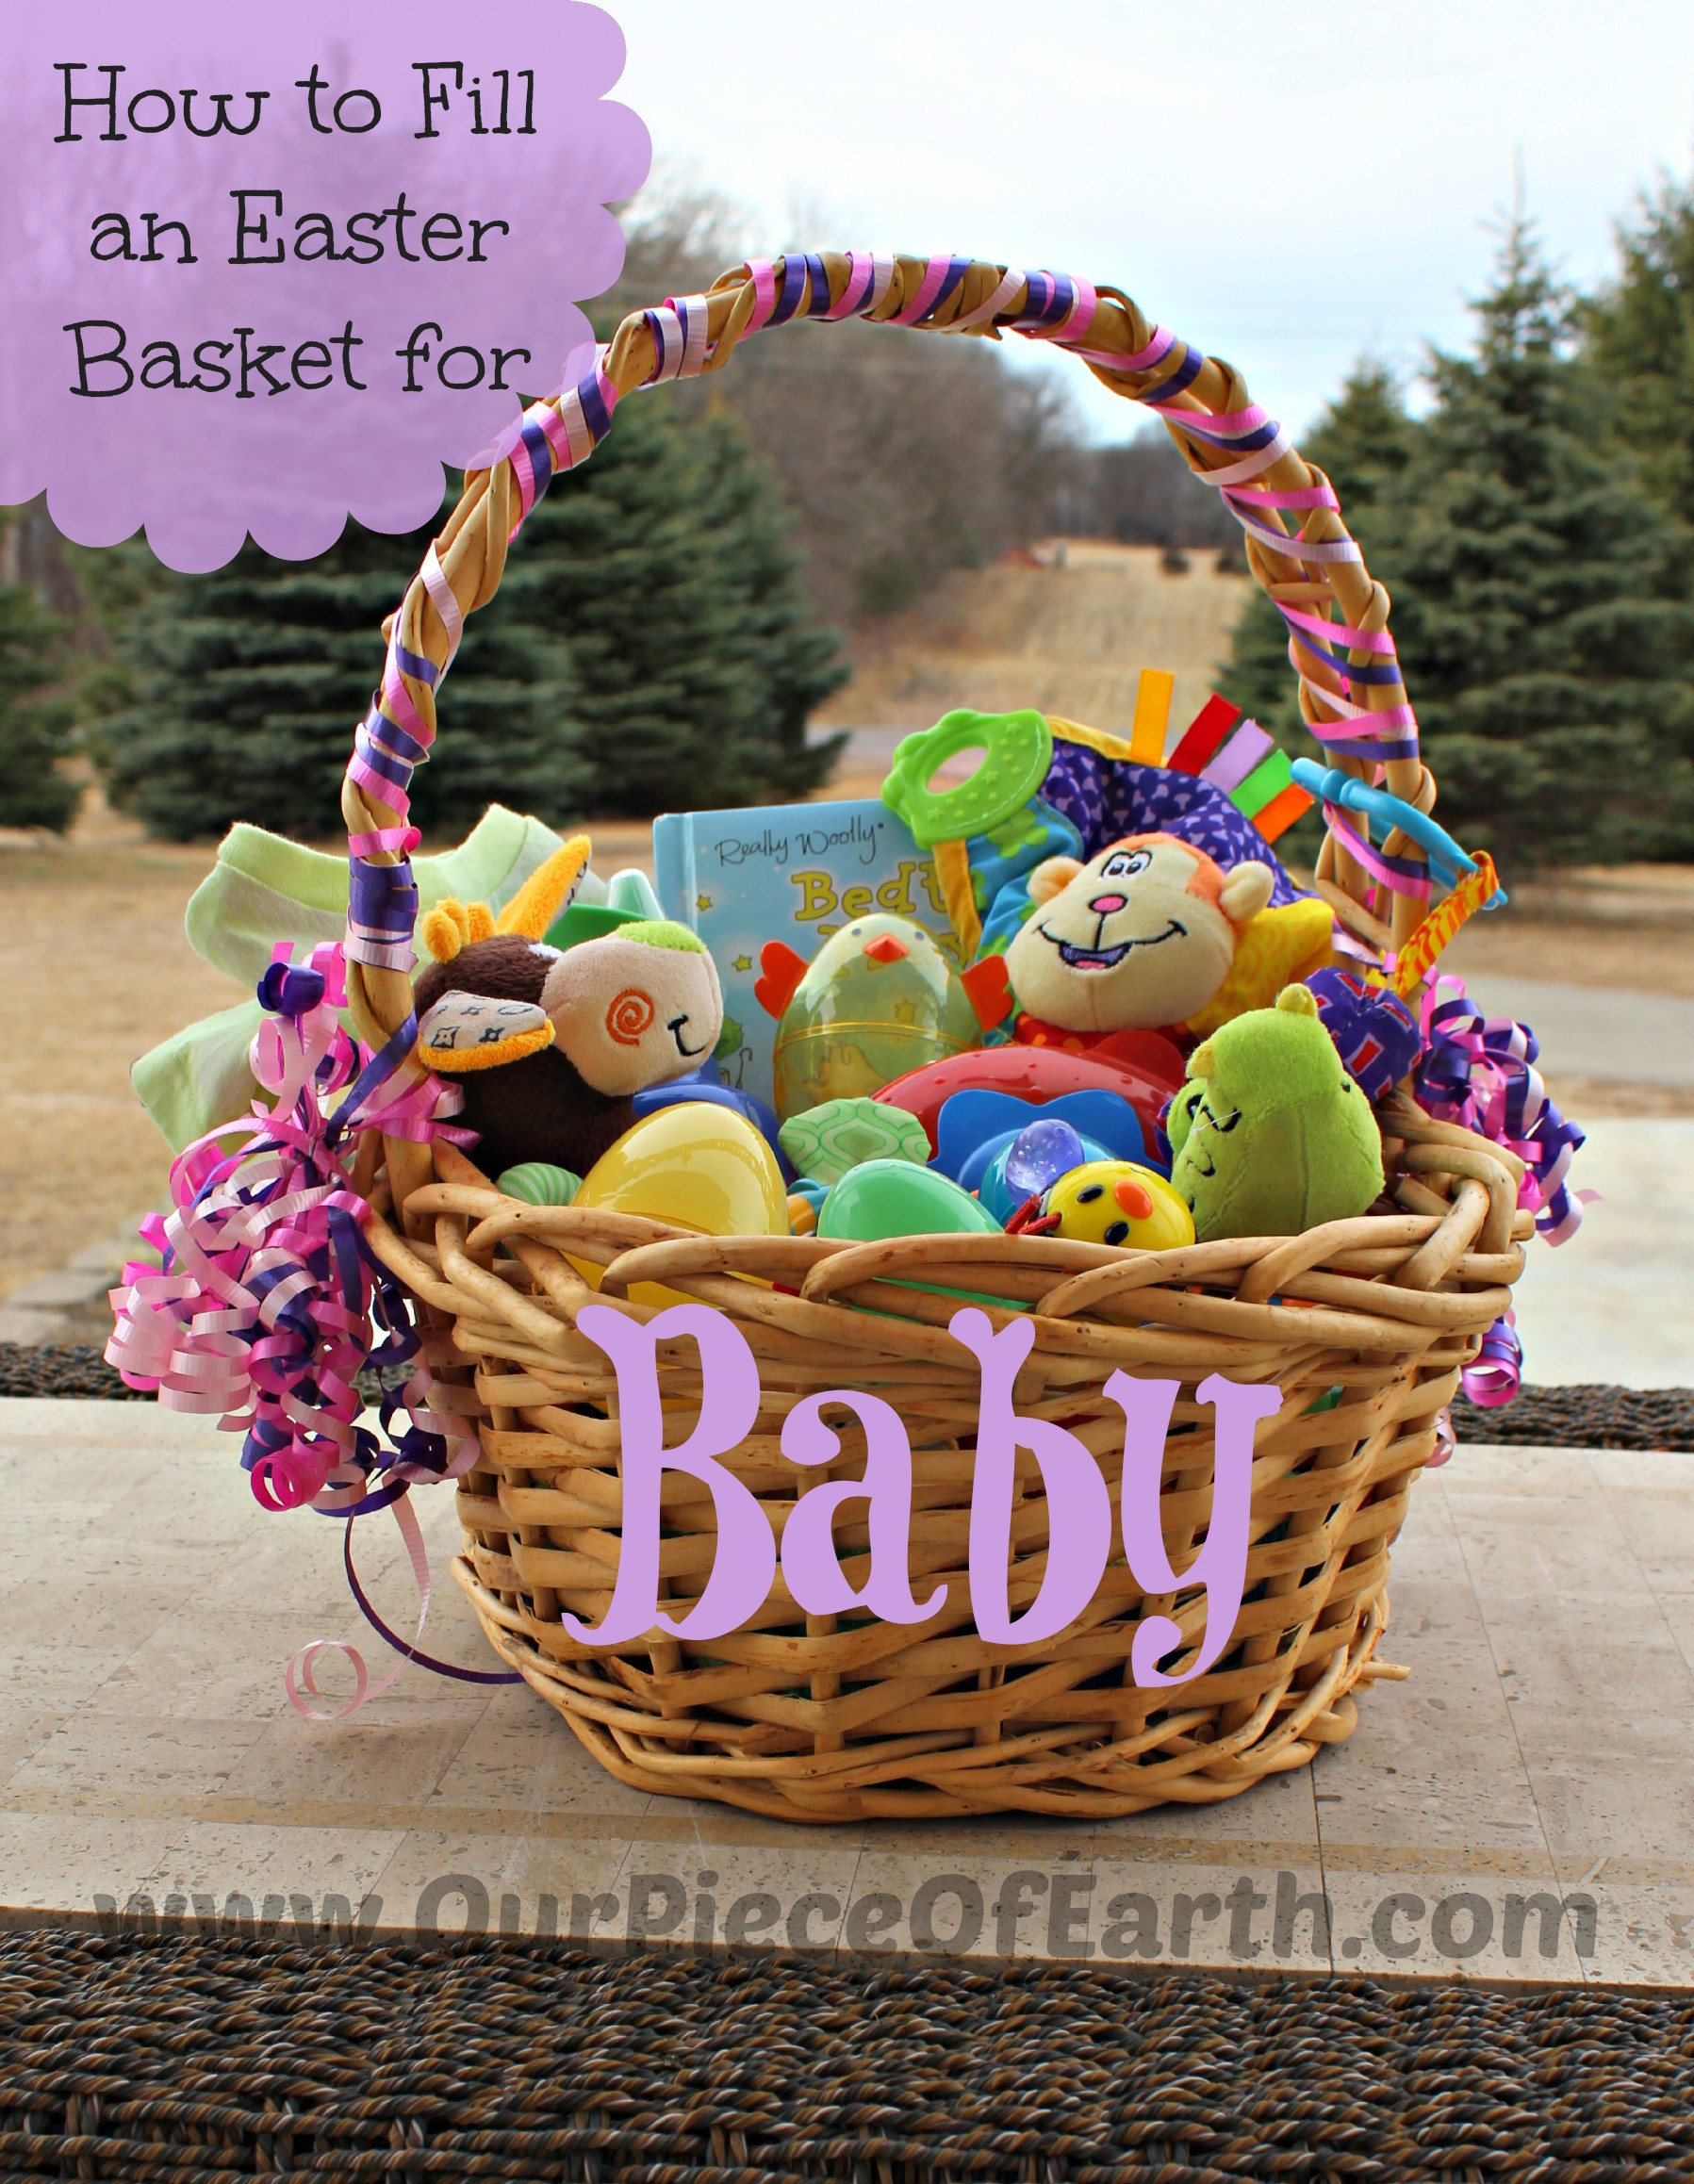 Gift Ideas For Baby'S First Easter
 A Sneak Peek at Henry s Easter Basket Fun and Easy Ideas